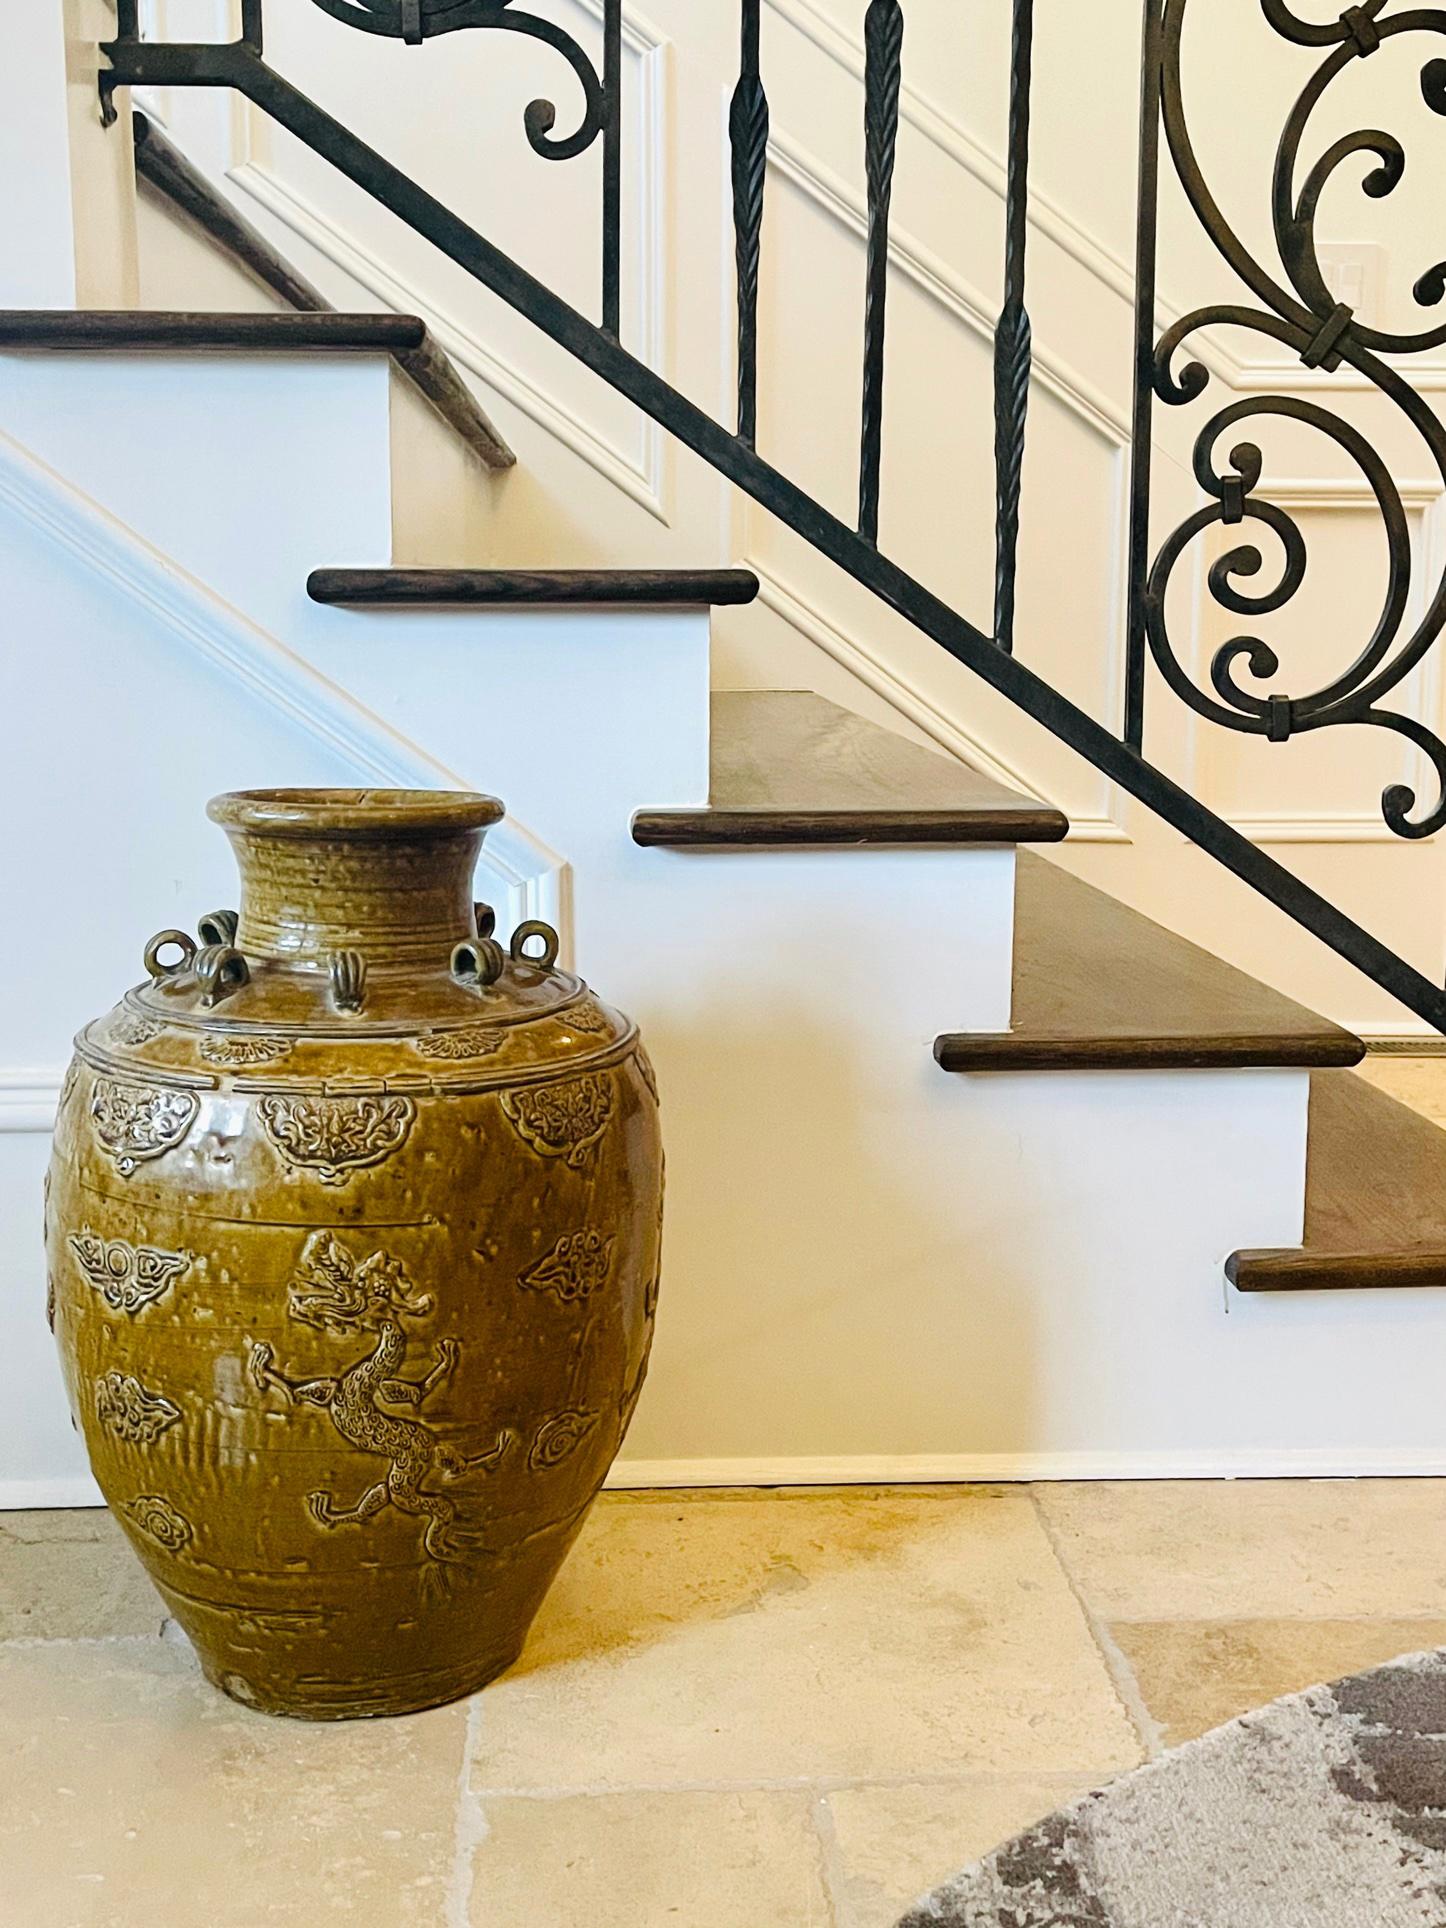 Heavily potted in a robust baluster form, this Chinese stoneware storage jar is covered with a thick yellow glaze. With a functional purpose, the wide shoulder was equipped with a circle of loops which were used to fasten the lid to the body. These